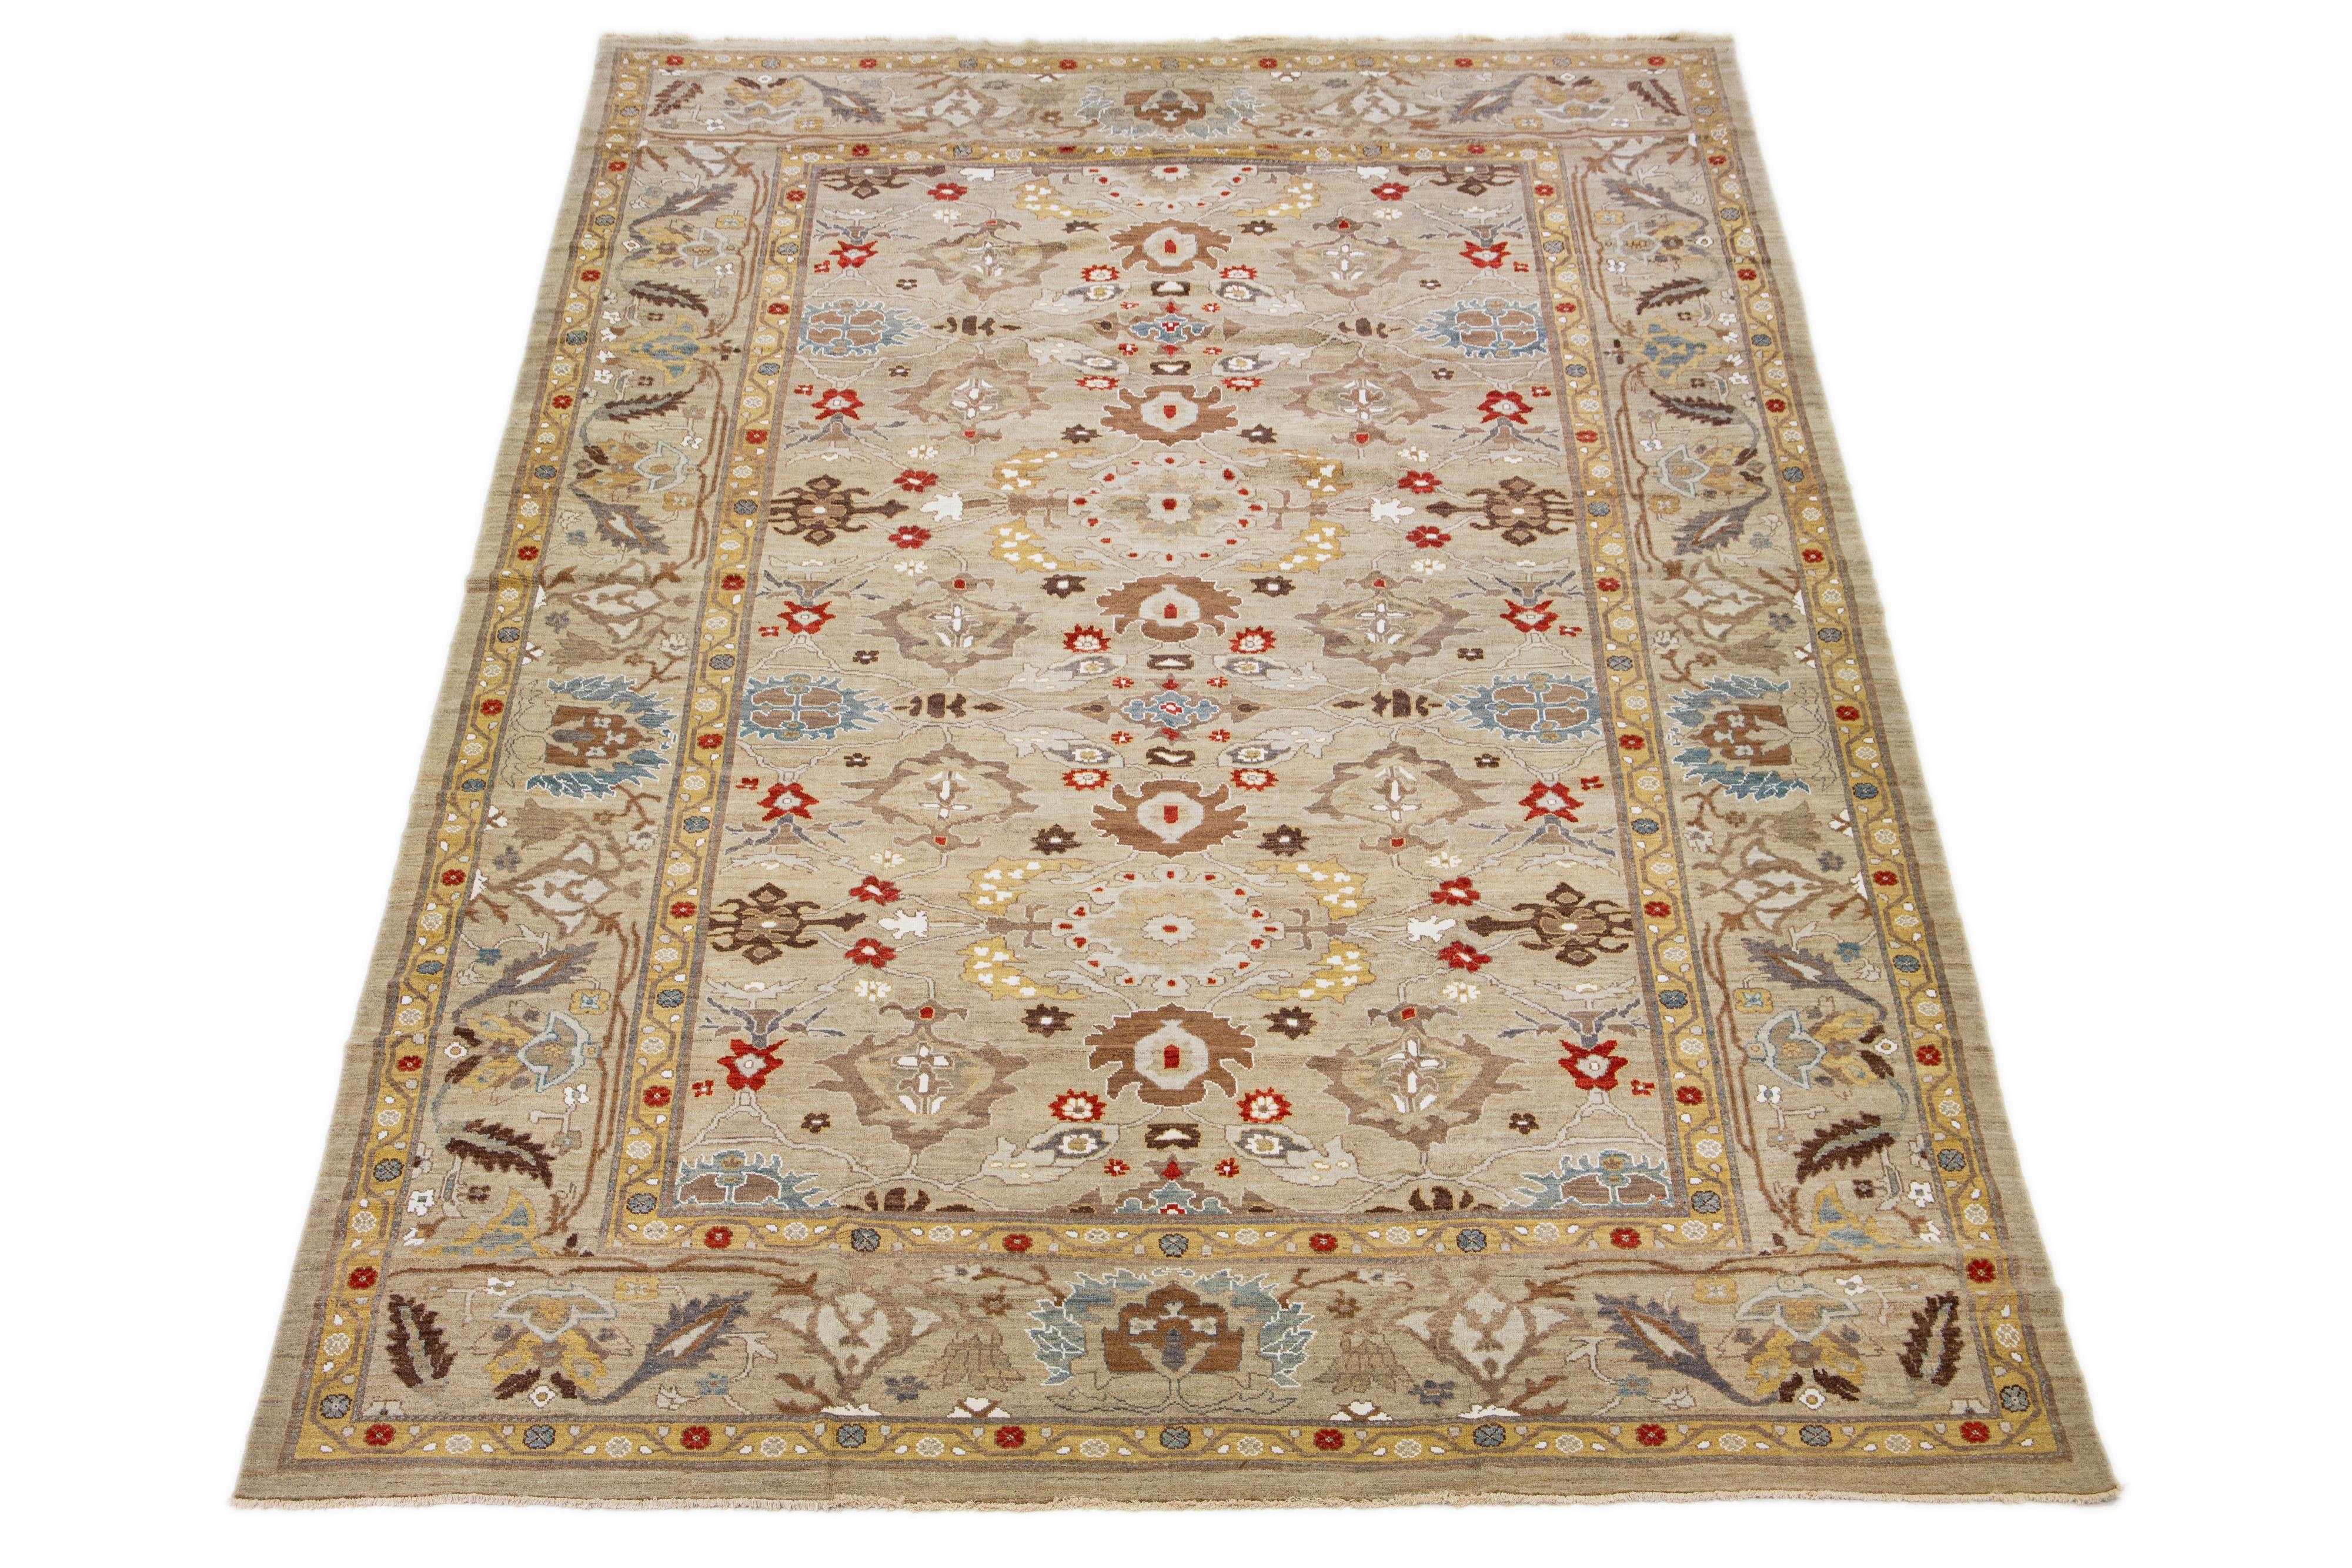 An elegant, oversized Sultanabad wool rug in a contemporary style is available. It features a light brown base color with a variety of multicolored accents. The rug is visually enriched with an expansive floral pattern.

This rug measures: 12'3